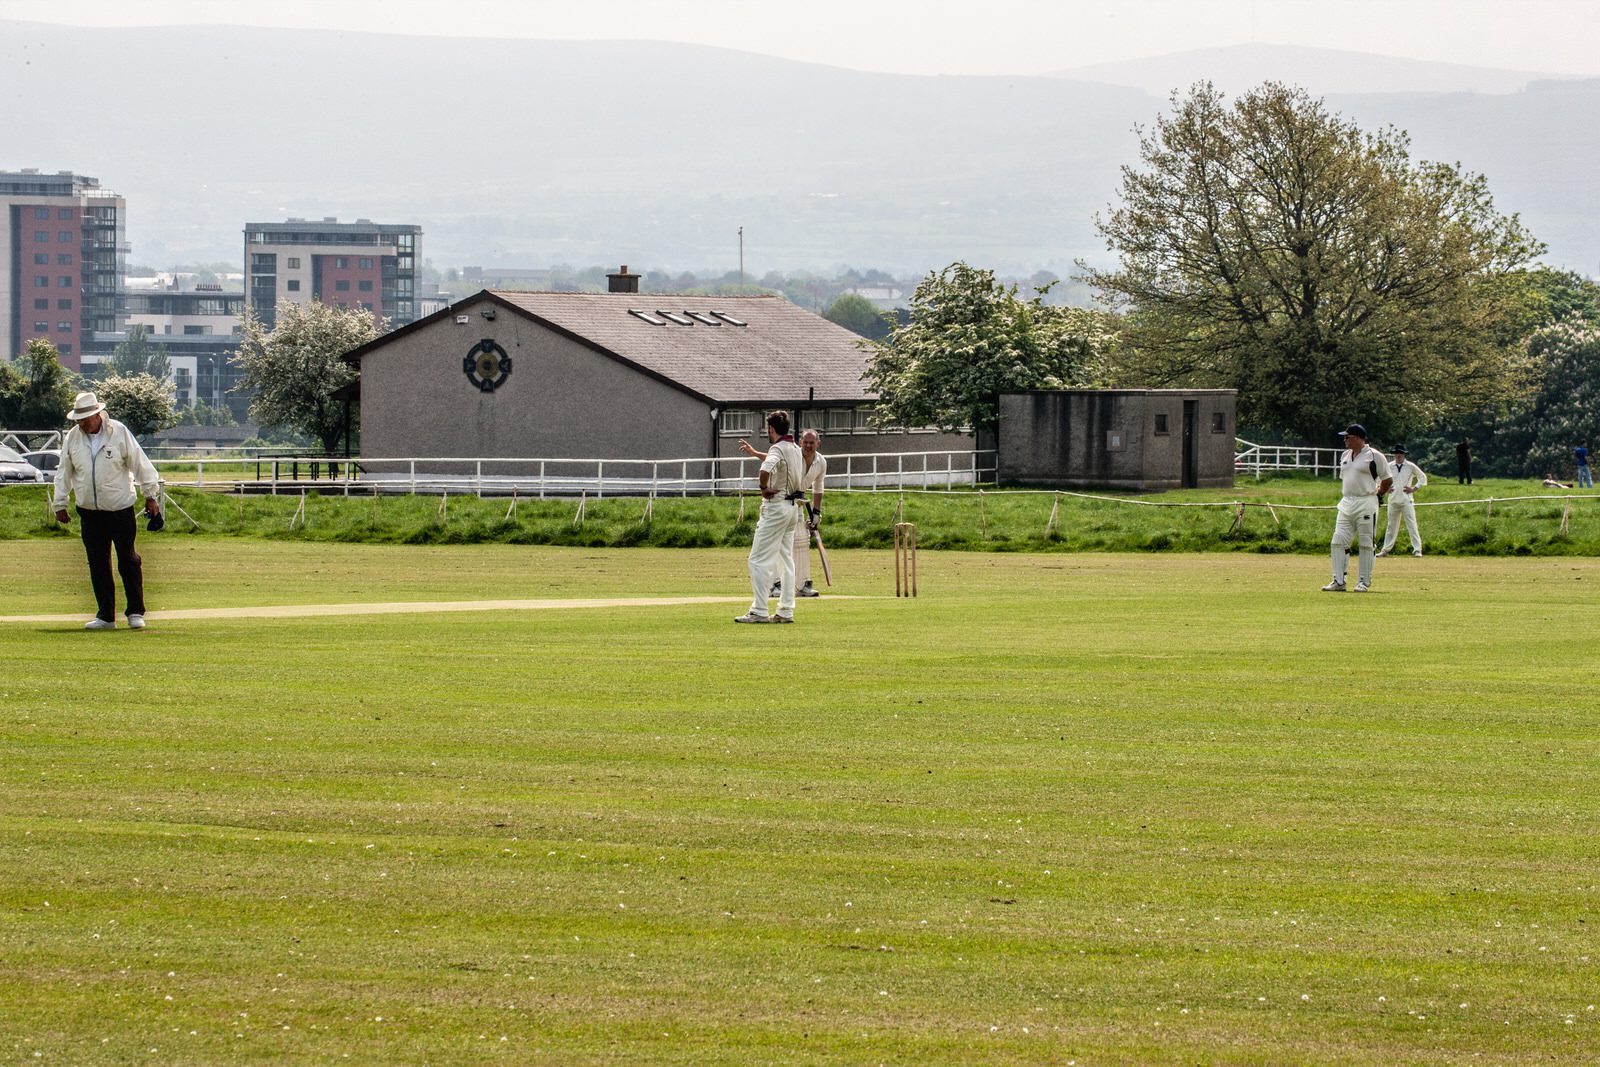 TWO CRICKET CLUBS IN PHOENIX PARK NEAR THE WELLINGTON MONUMENT 023